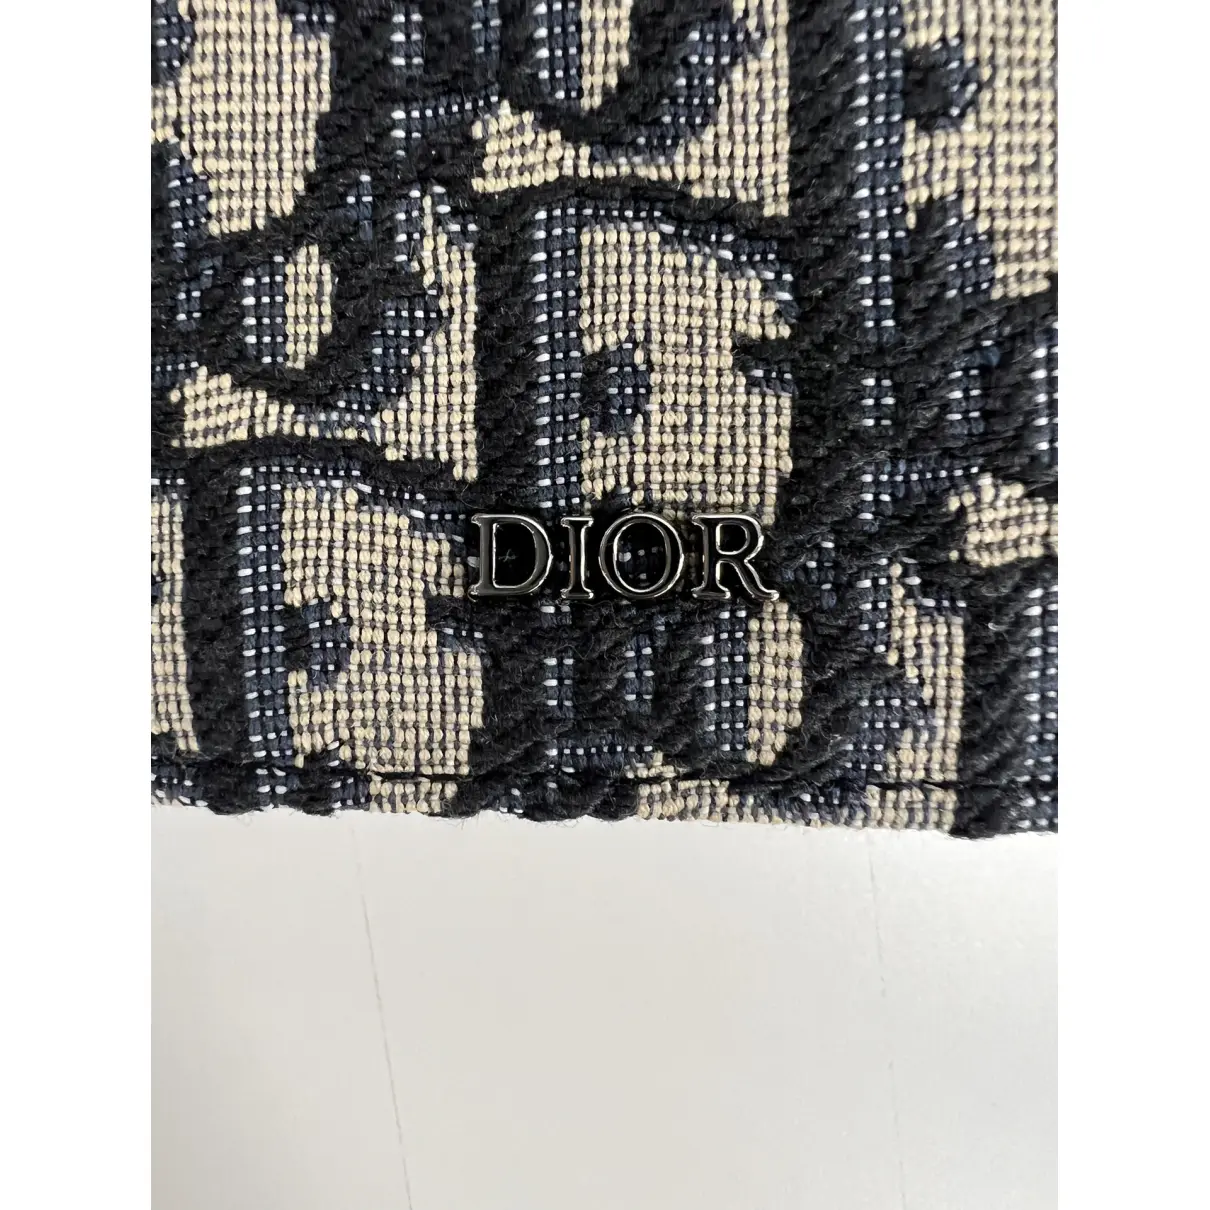 Buy Dior Leather small bag online